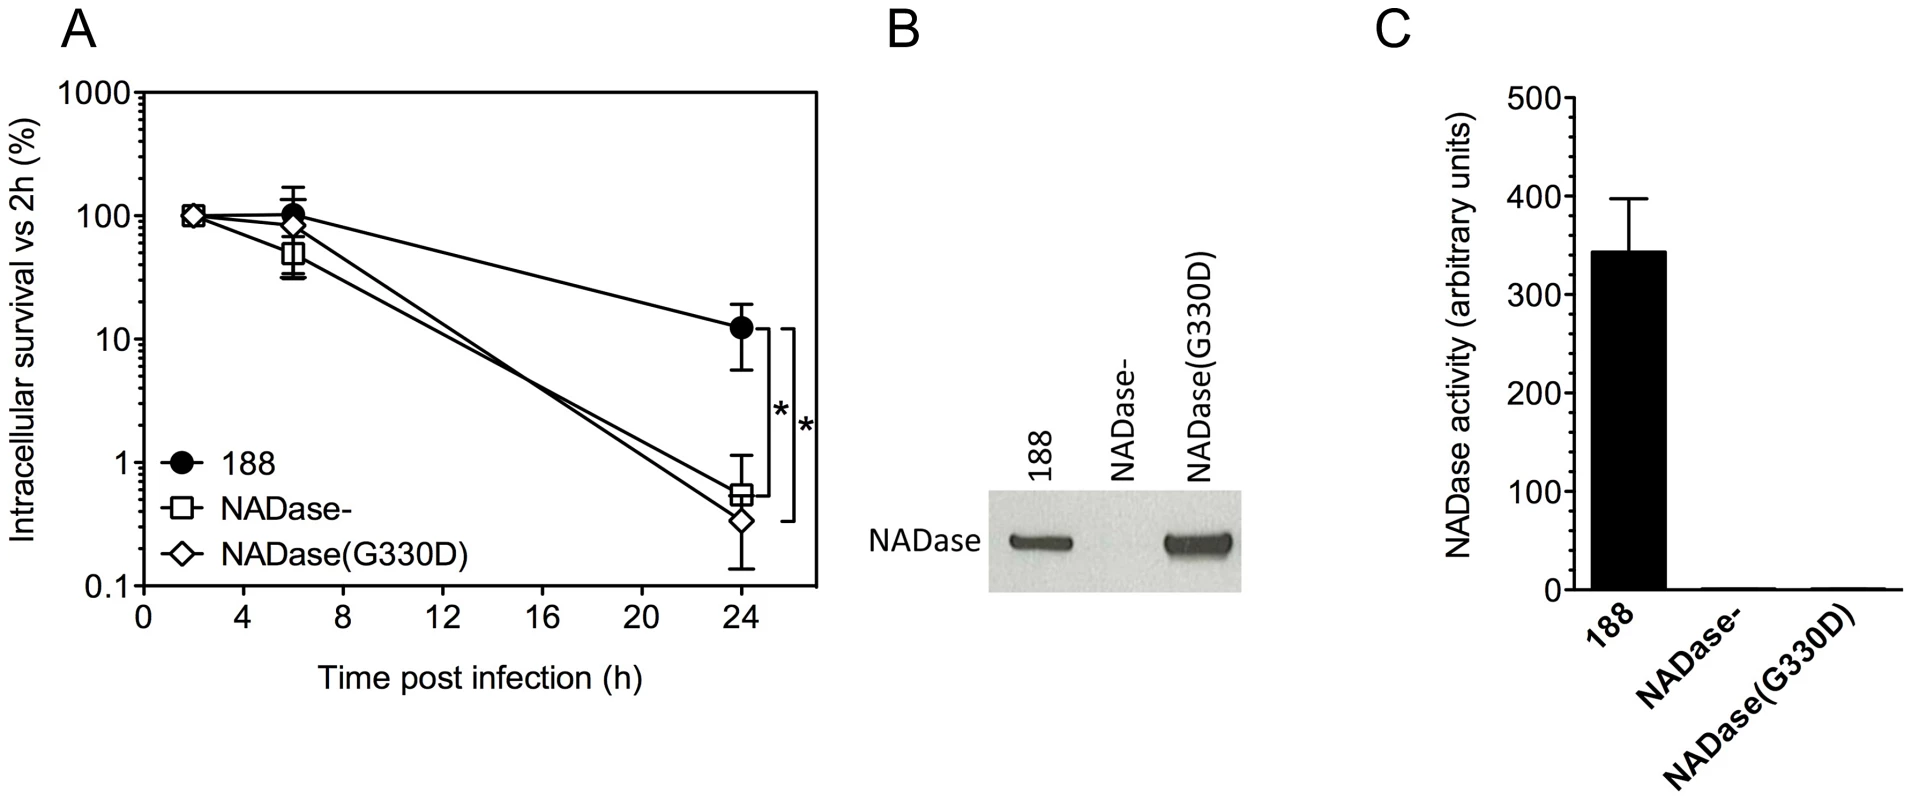 Expression of active NADase plays a central role in the intracellular survival of GAS in oropharyngeal keratinocytes.